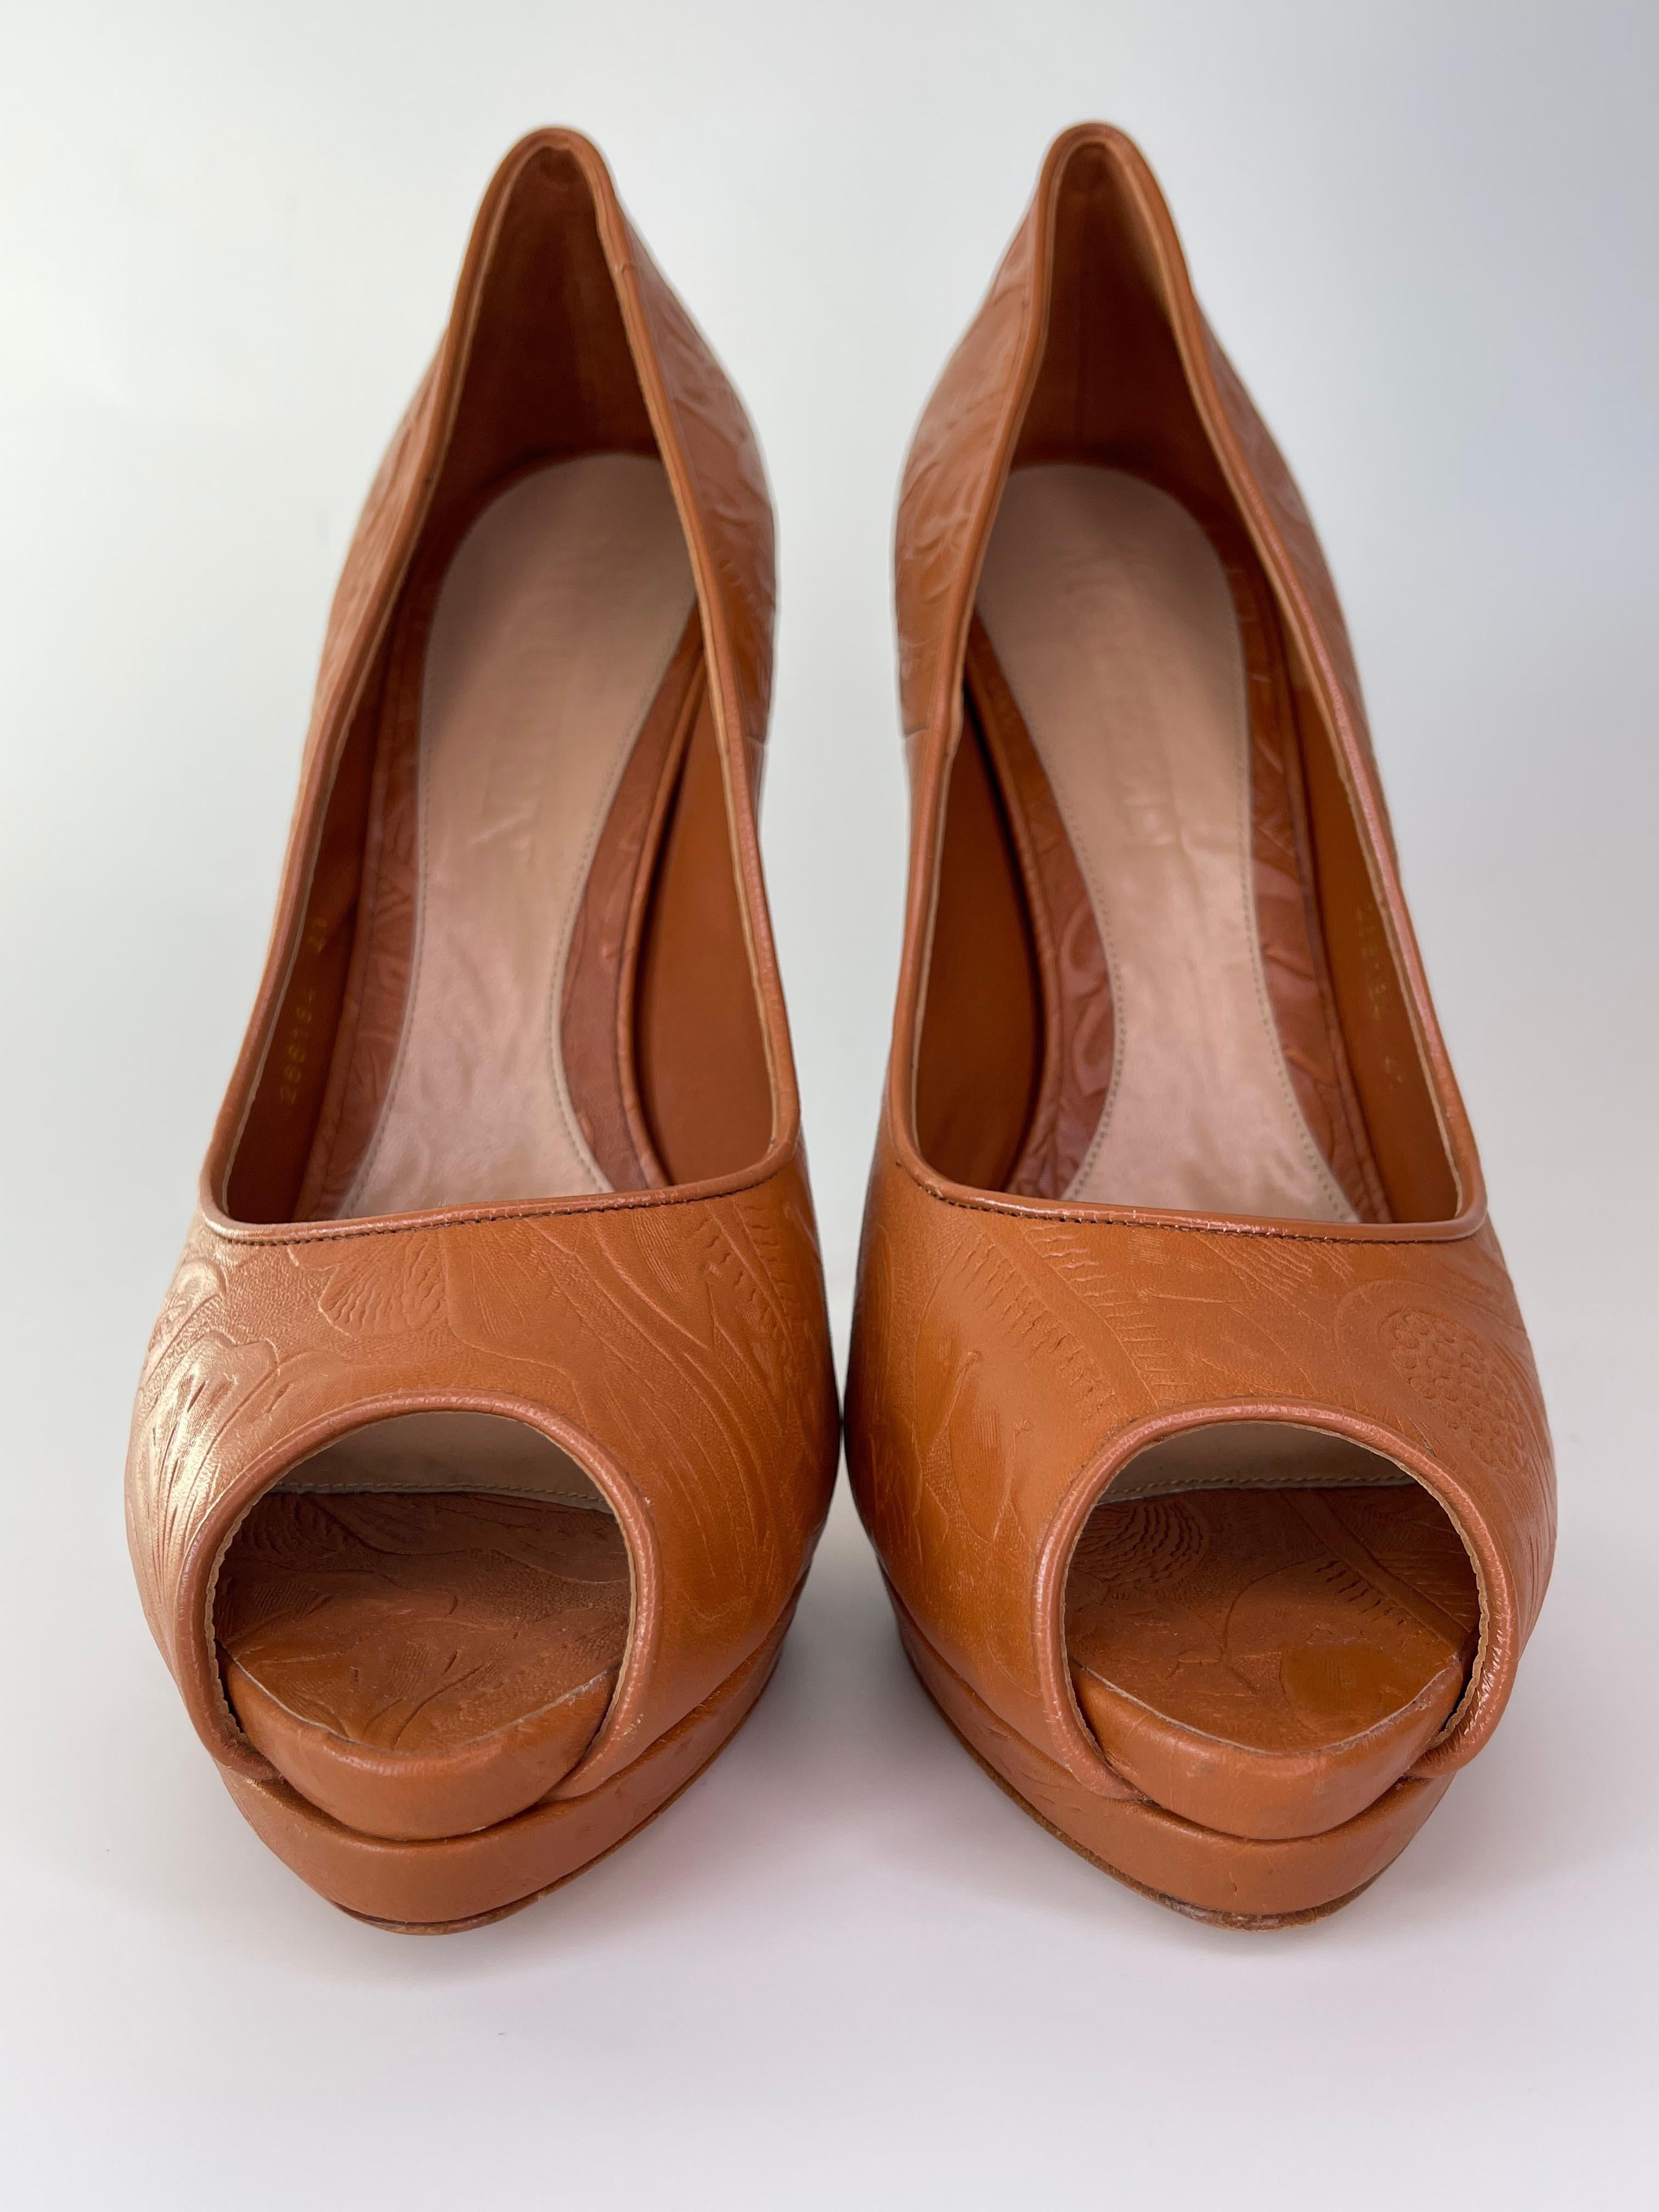 COLOR: Brandy (mixture of orange and brown)
MATERIAL: Leather with wood heel
ITEM CODE: 266184
SIZE: 40 EU / 9 US
HEEL HEIGHT: 147 mm (5.8 in)
COMES WITH: Original box
CONDITION: Excellent - strong shoes with minimal sings of wear consistent with